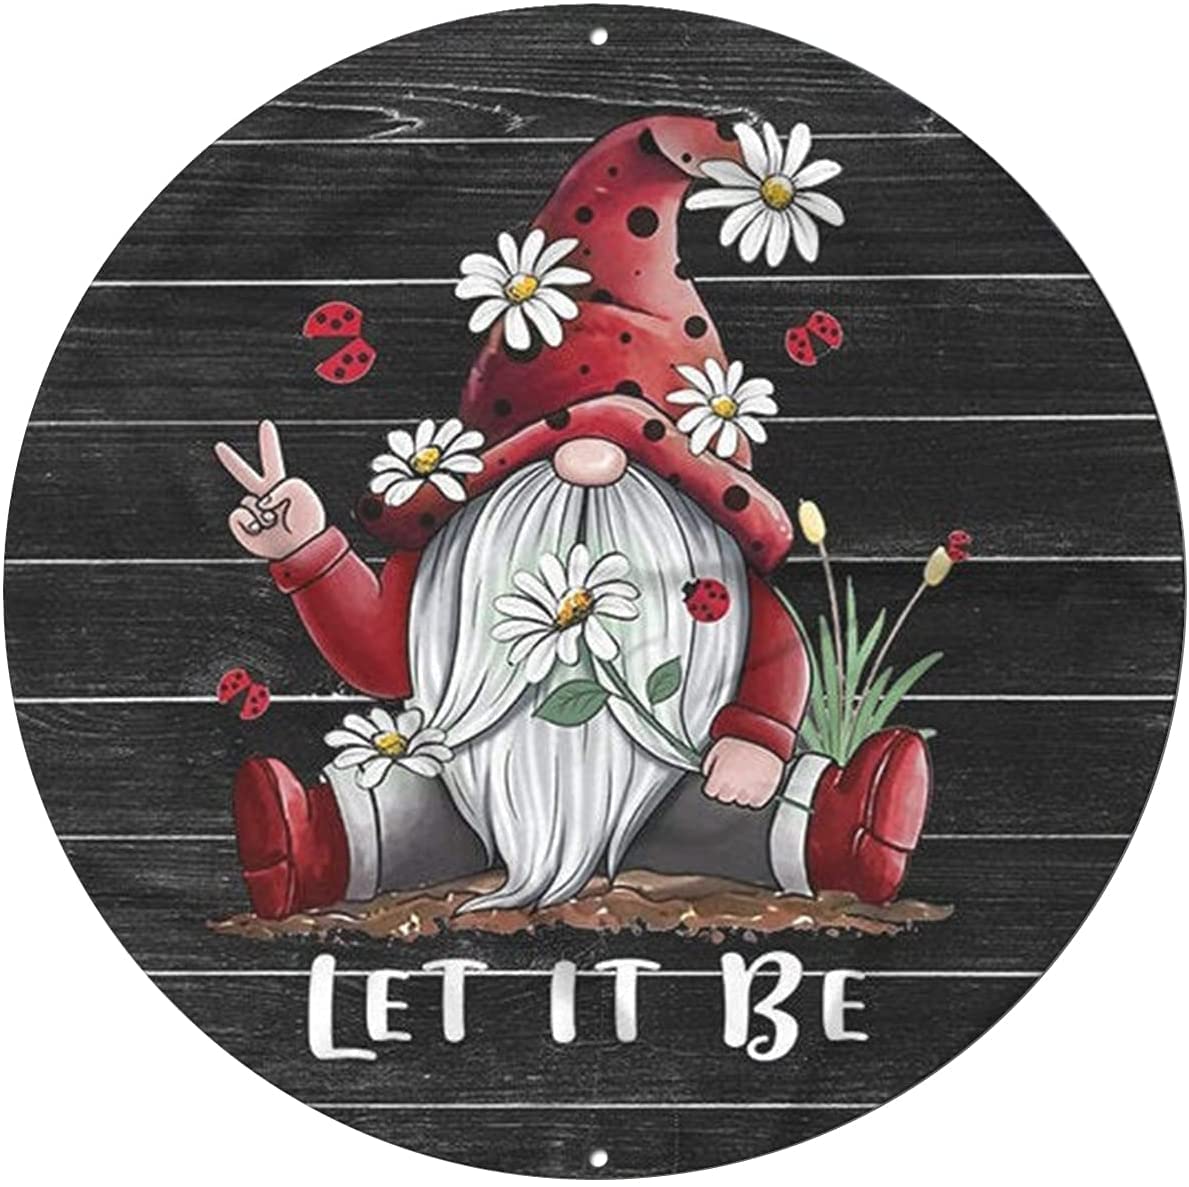 Xiddxu Round Metal Tin Sign Rustic Wall Decor Let it be, Red Gnome, Hippie, Camping Plaque for Home Garden Kitchen Bar Cafe Restaurant Garage Retro Vintage Wall Art Wall Decor Retro Vintage 12x12 Inch 12'' X 12'' Round Sign 07